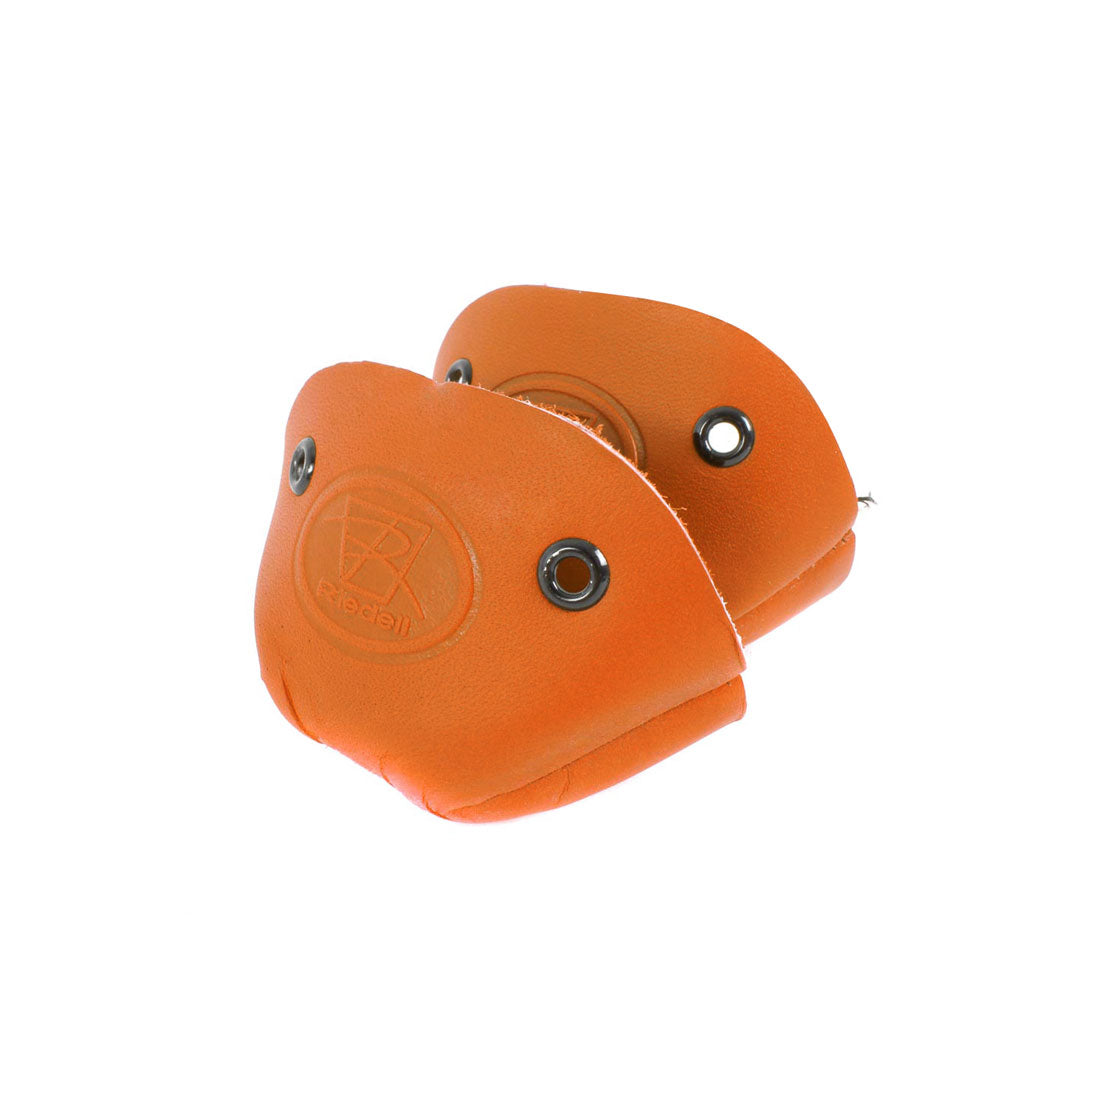 Riedell Toe Cap 2pk - Leather Orange Roller Skate Hardware and Parts